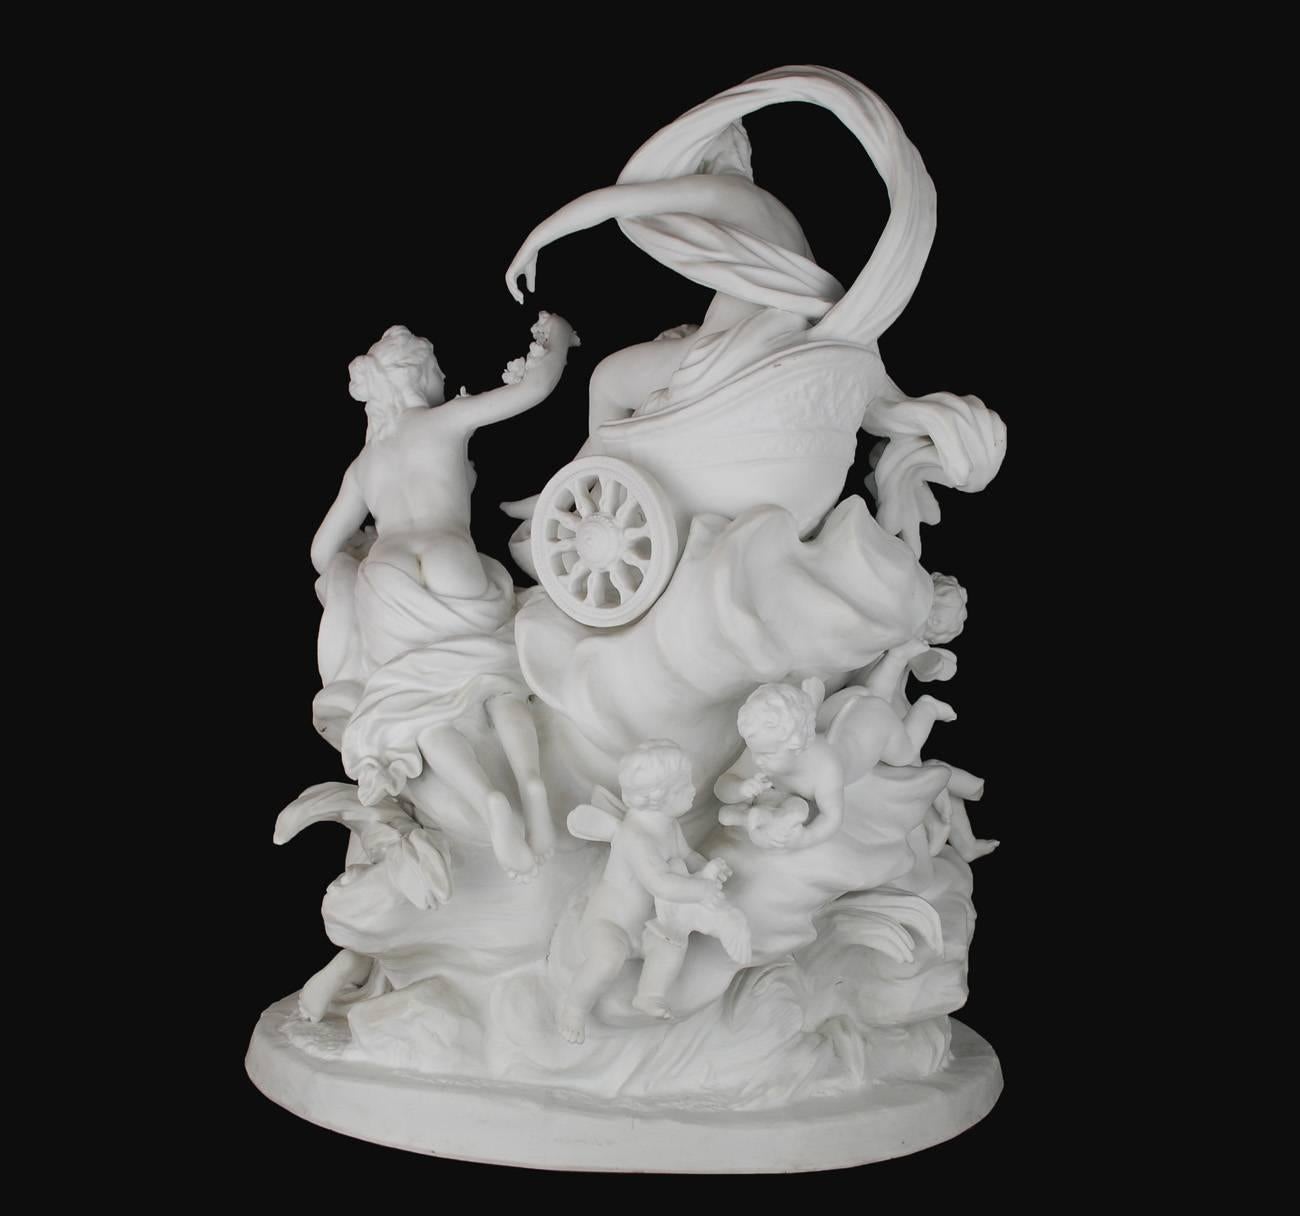 This rare 19th century white parian sculpture in the round features the goddess being attended by maidens and cherubs. From the base up, every living creature is in mid-action, creating visual movement that draws the eye upwards toward the pinnacle: